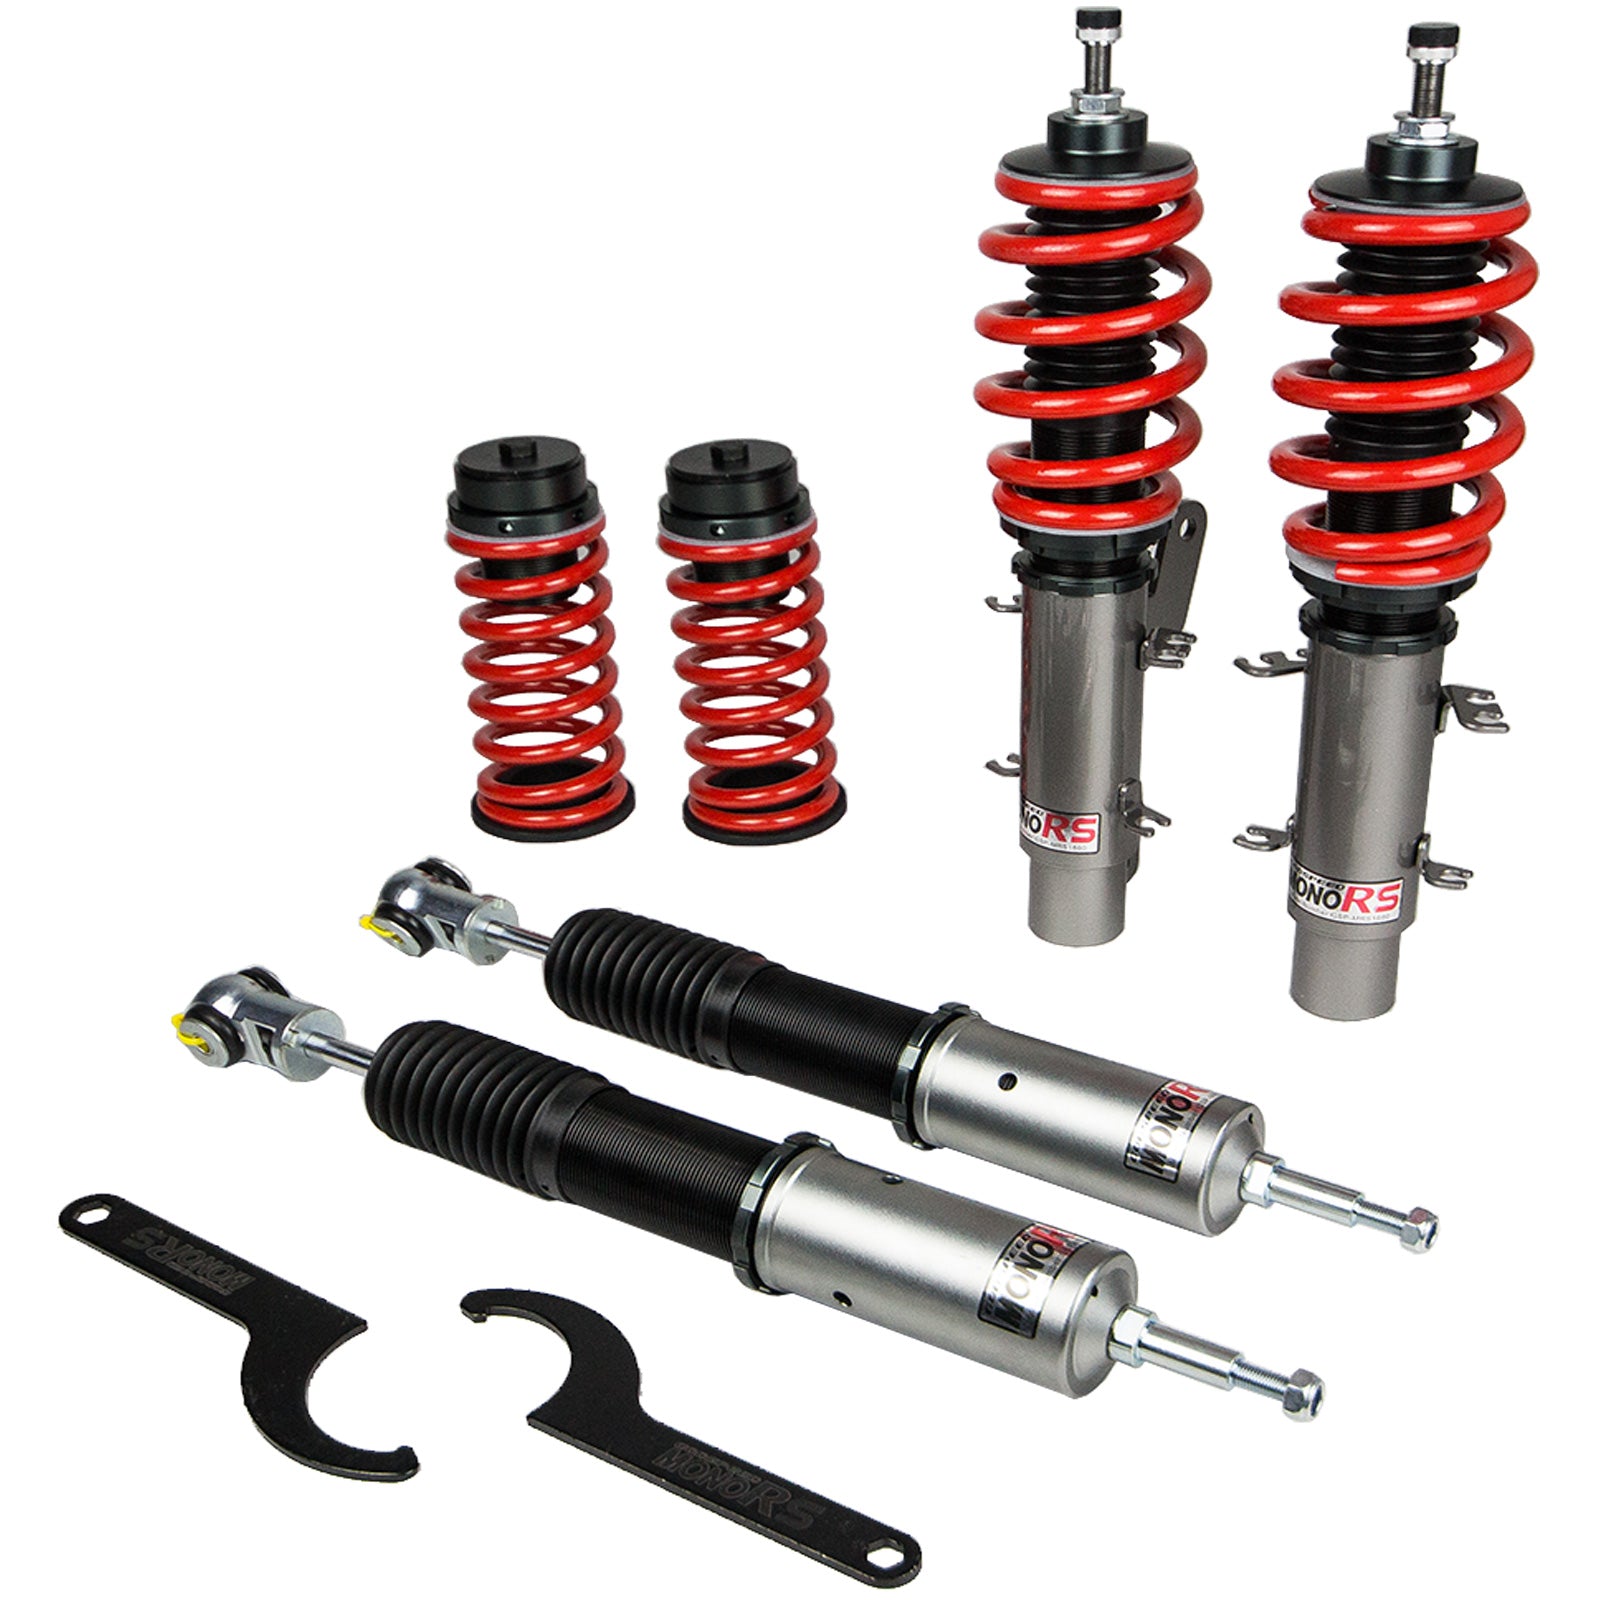 Godspeed MRS1860-A MonoRS Coilover Lowering Kit, 32 Damping Adjustment, Ride Height Adjustable